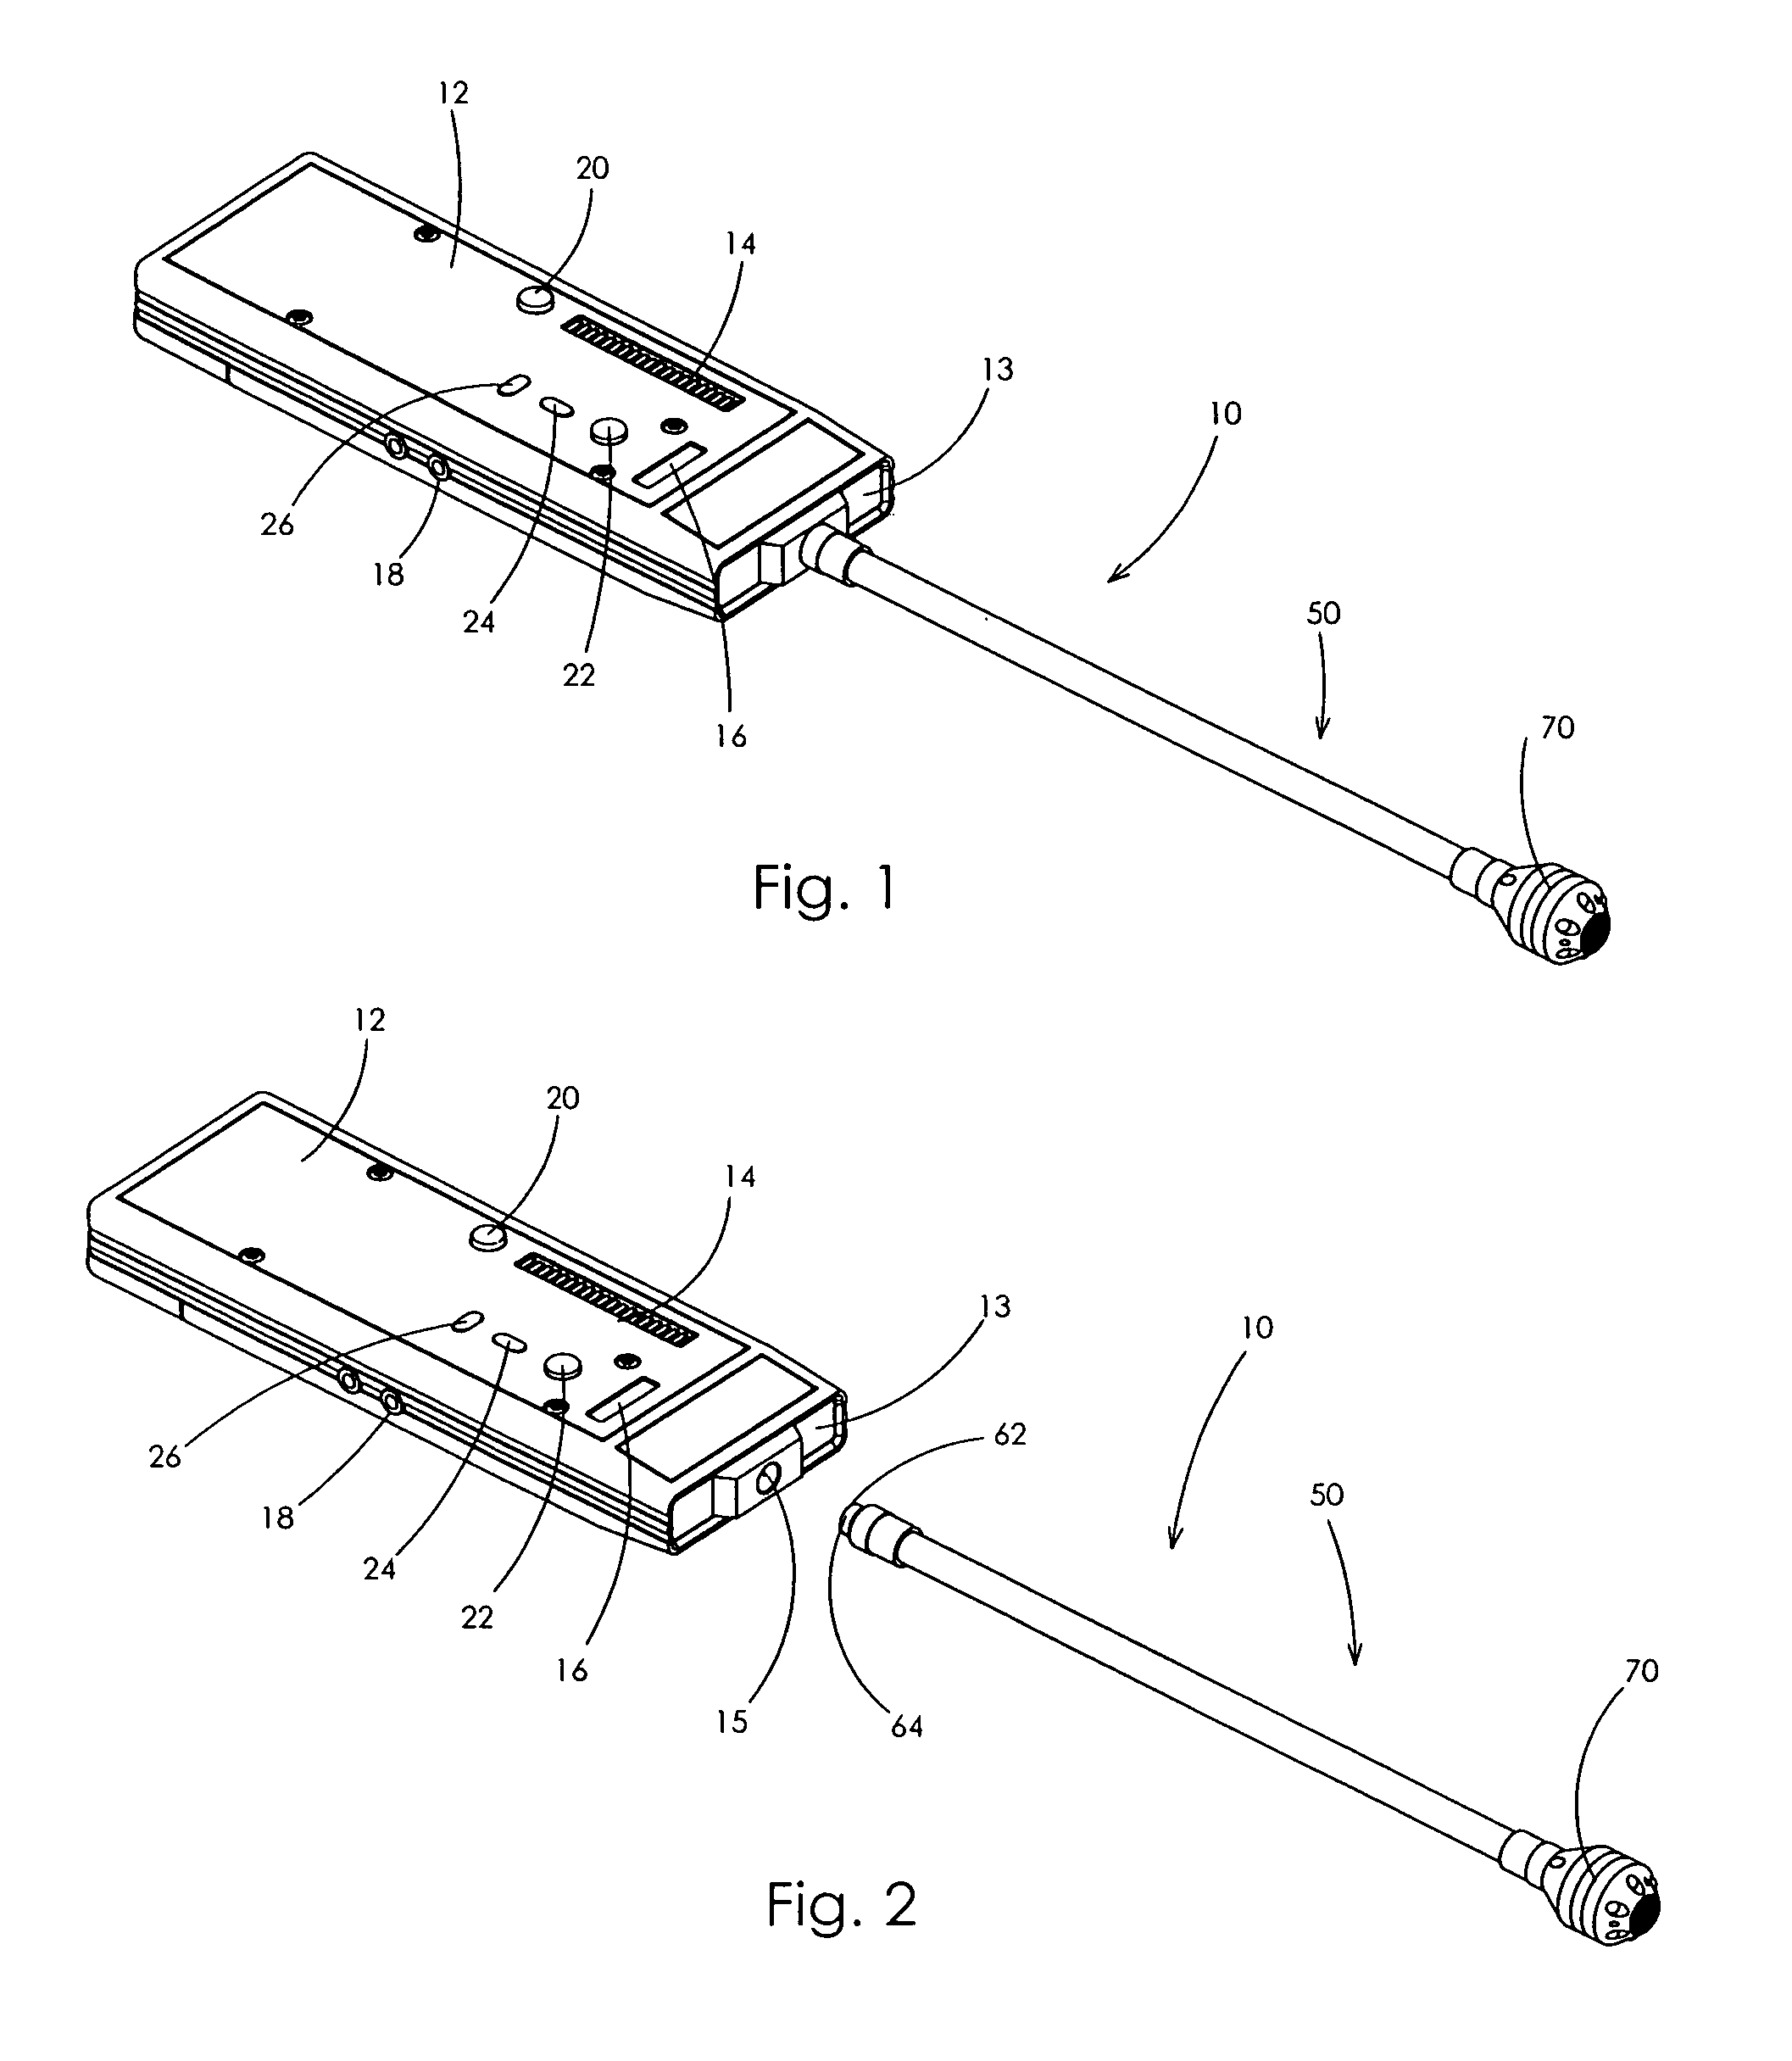 Multi-functional leak detection instrument along with sensor mounting assembly and methodology utilizing the same